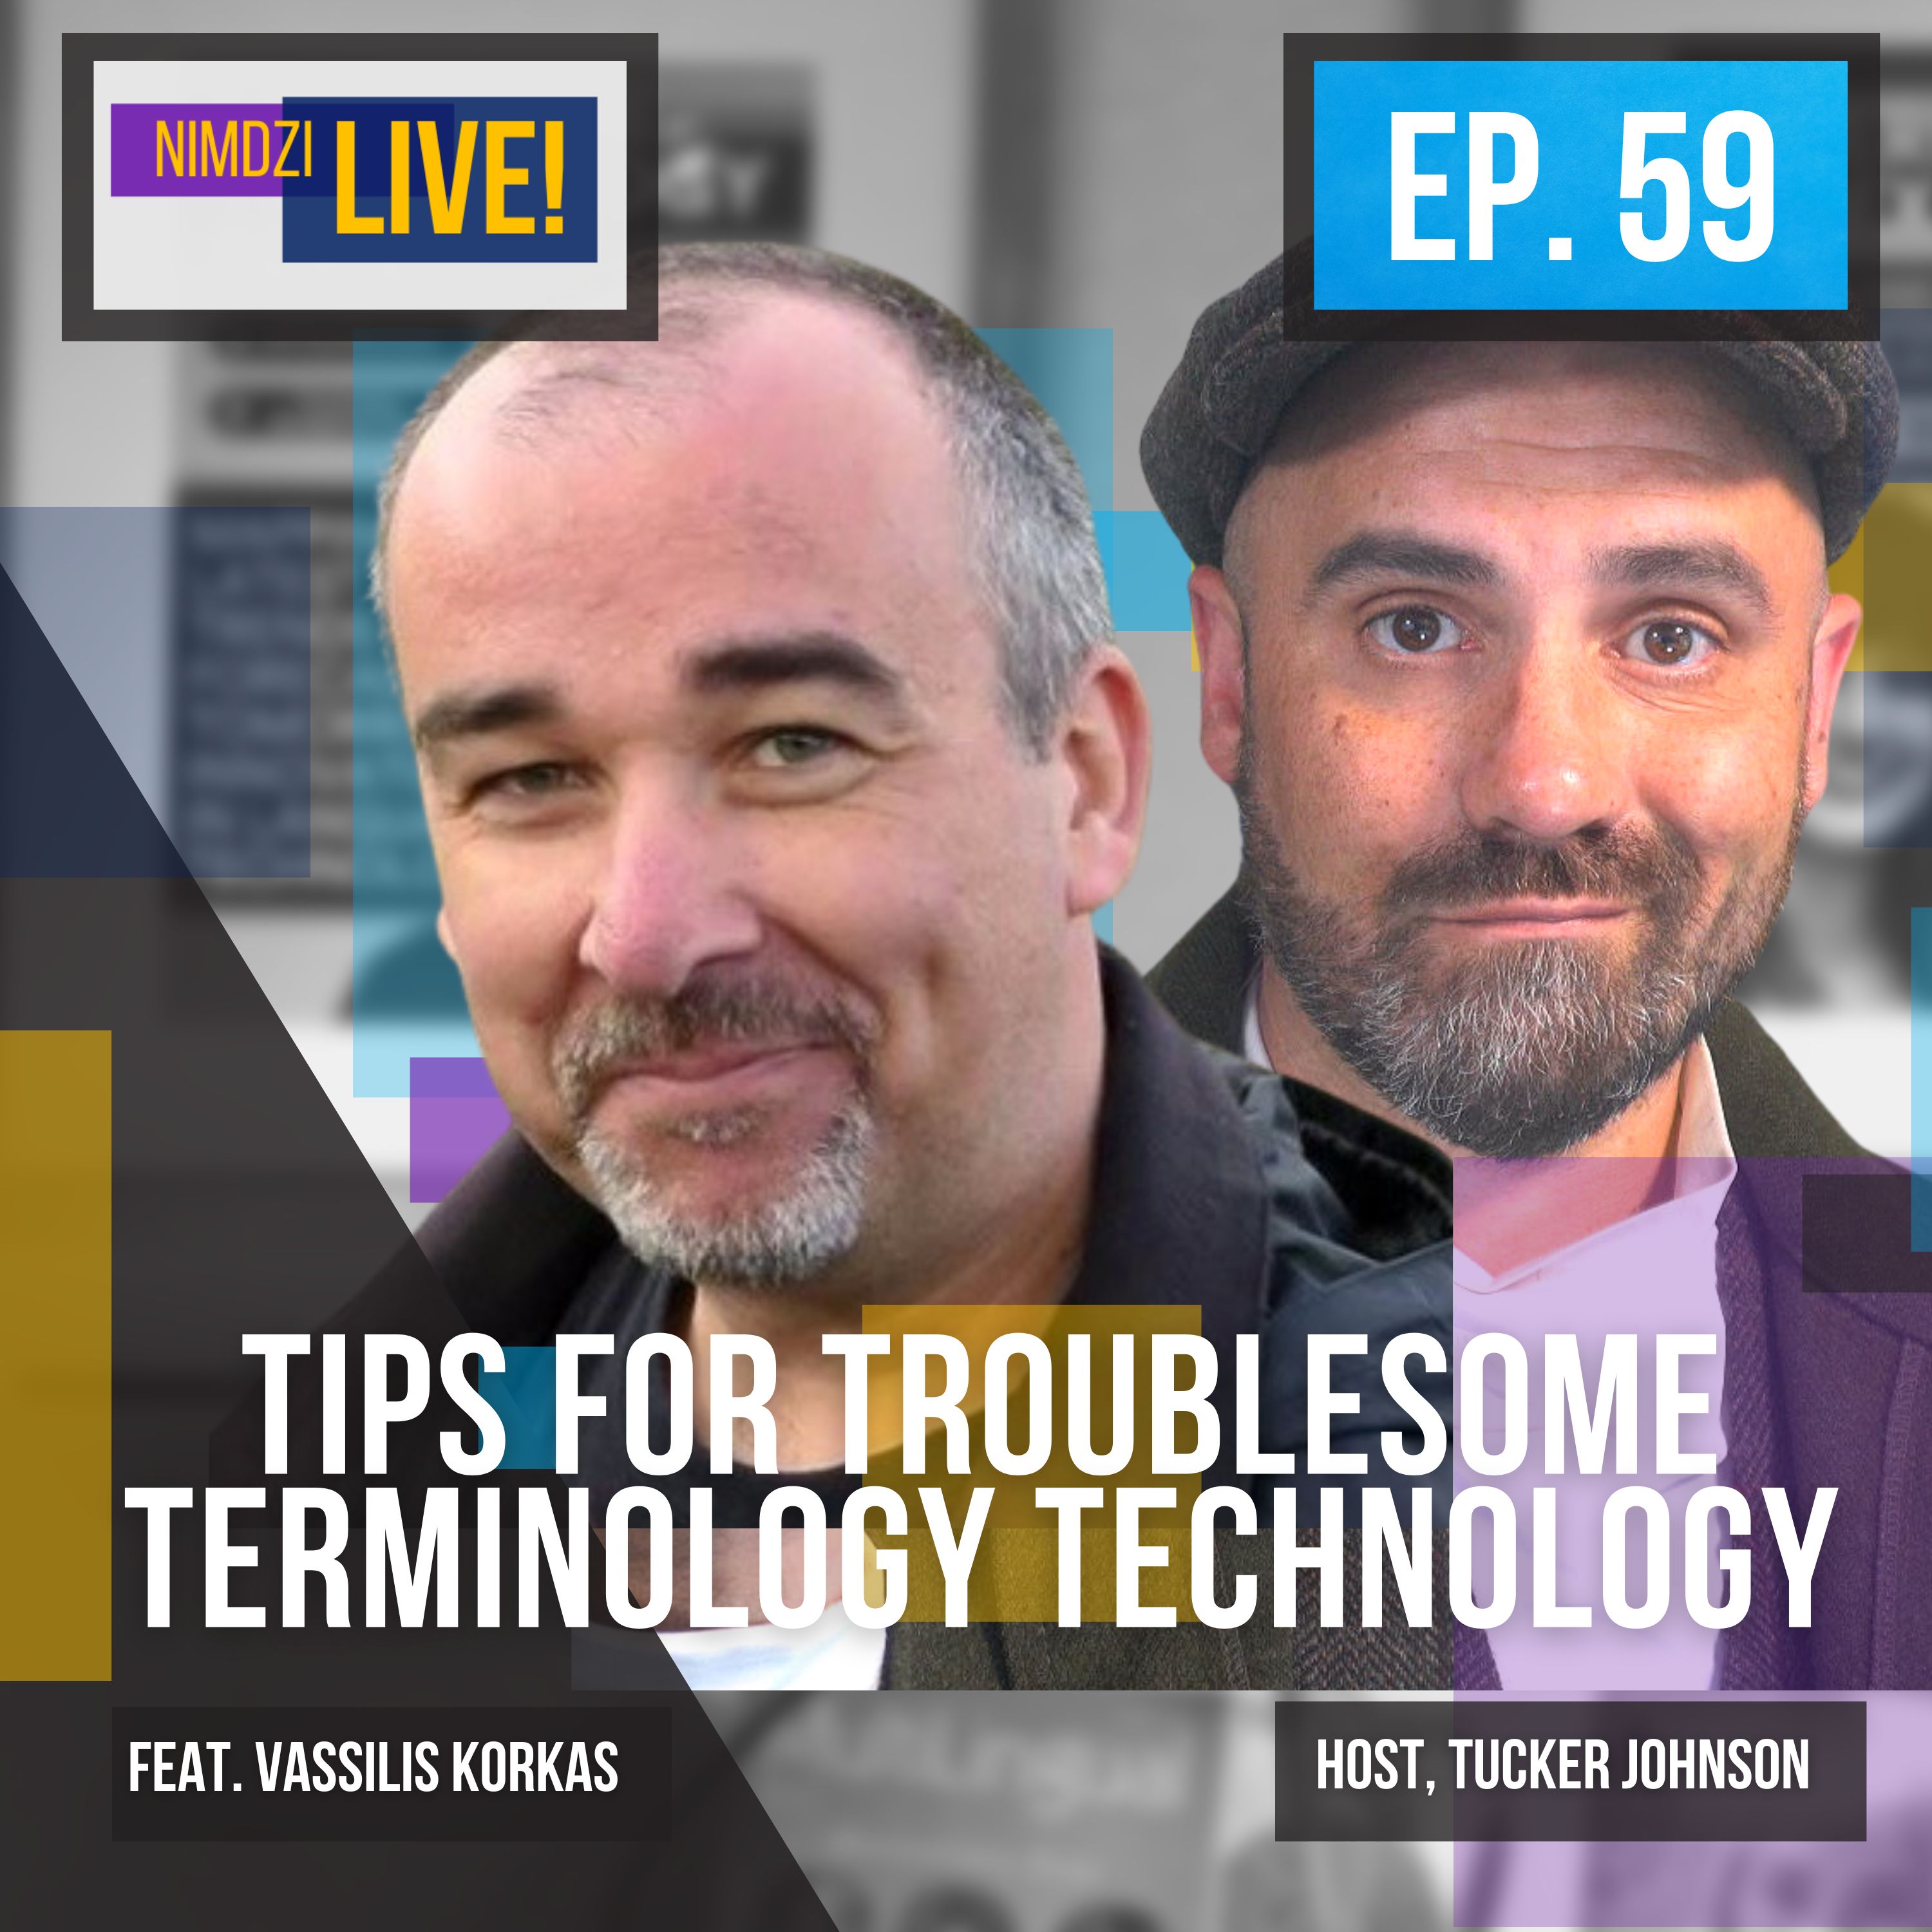 Tips for Troublesome Terminology Technology (feat. Vassilis Korkas)